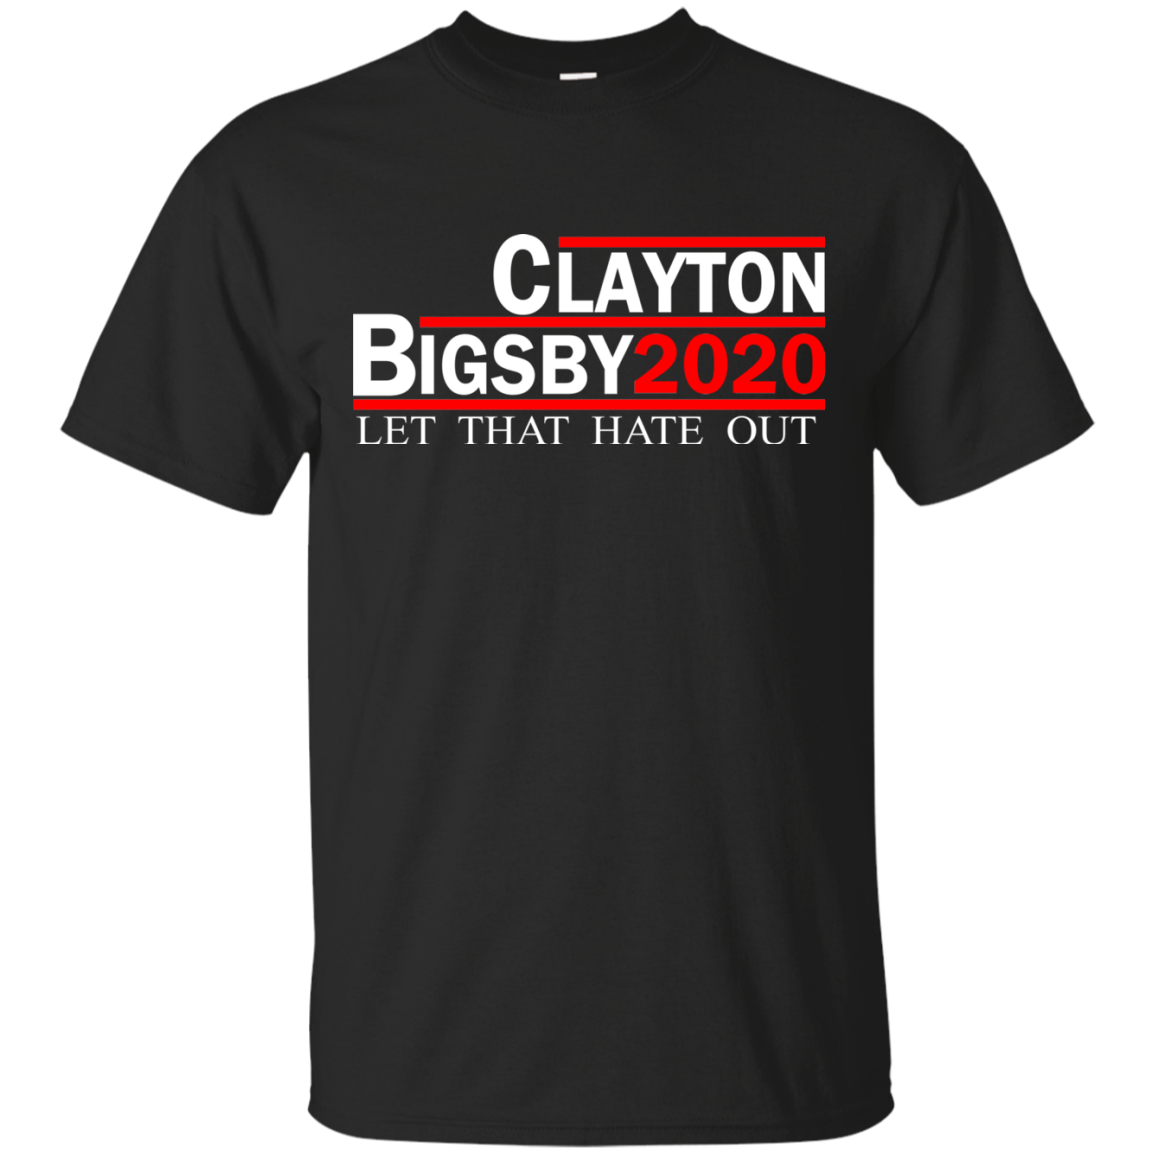 Clayton Bigsby 2020 shirt: Let that hate out